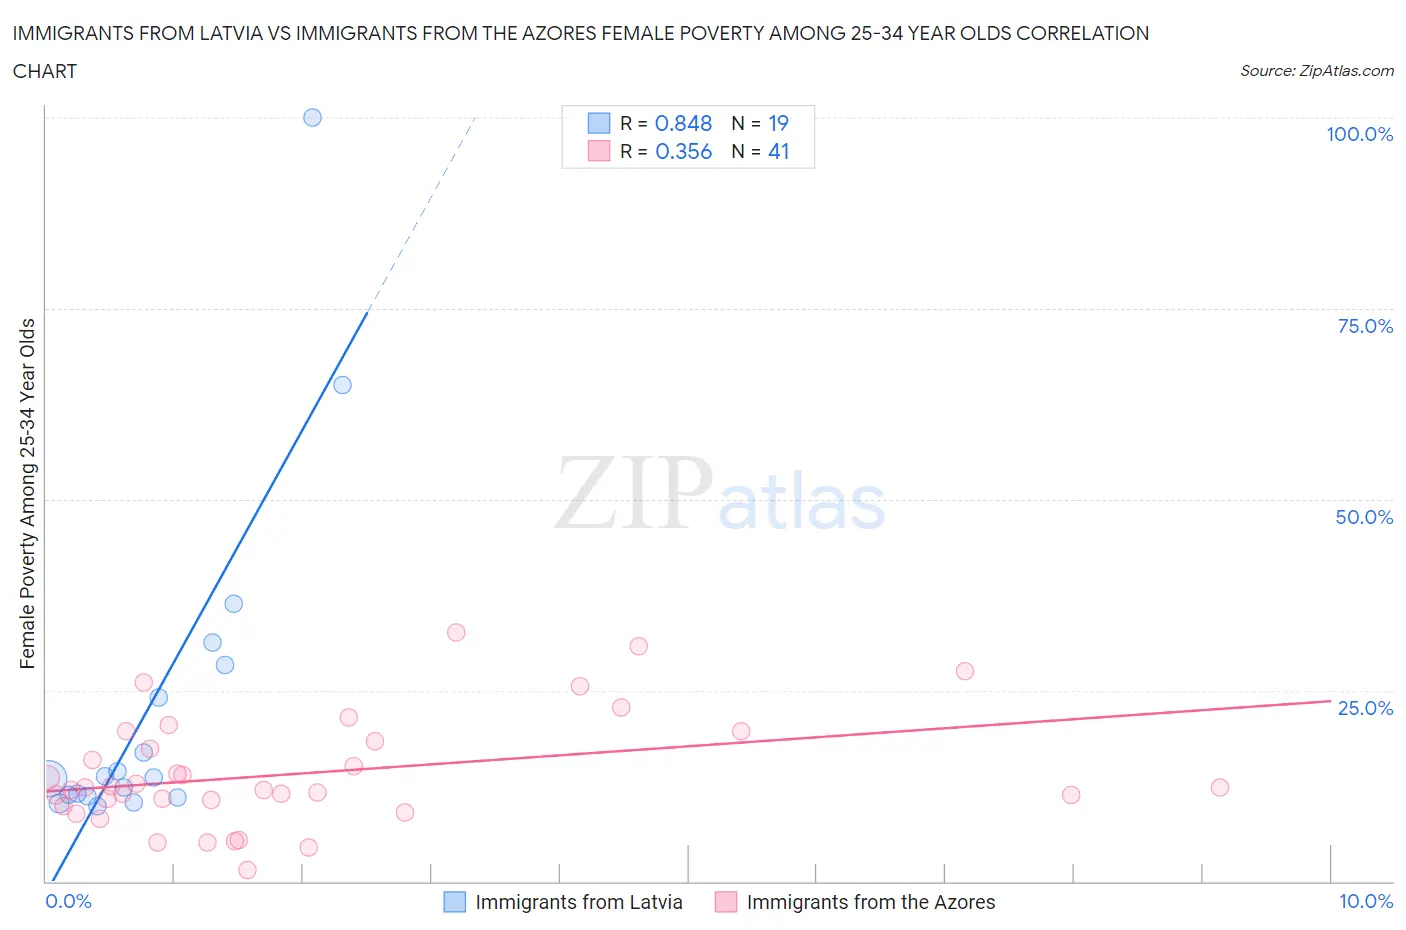 Immigrants from Latvia vs Immigrants from the Azores Female Poverty Among 25-34 Year Olds